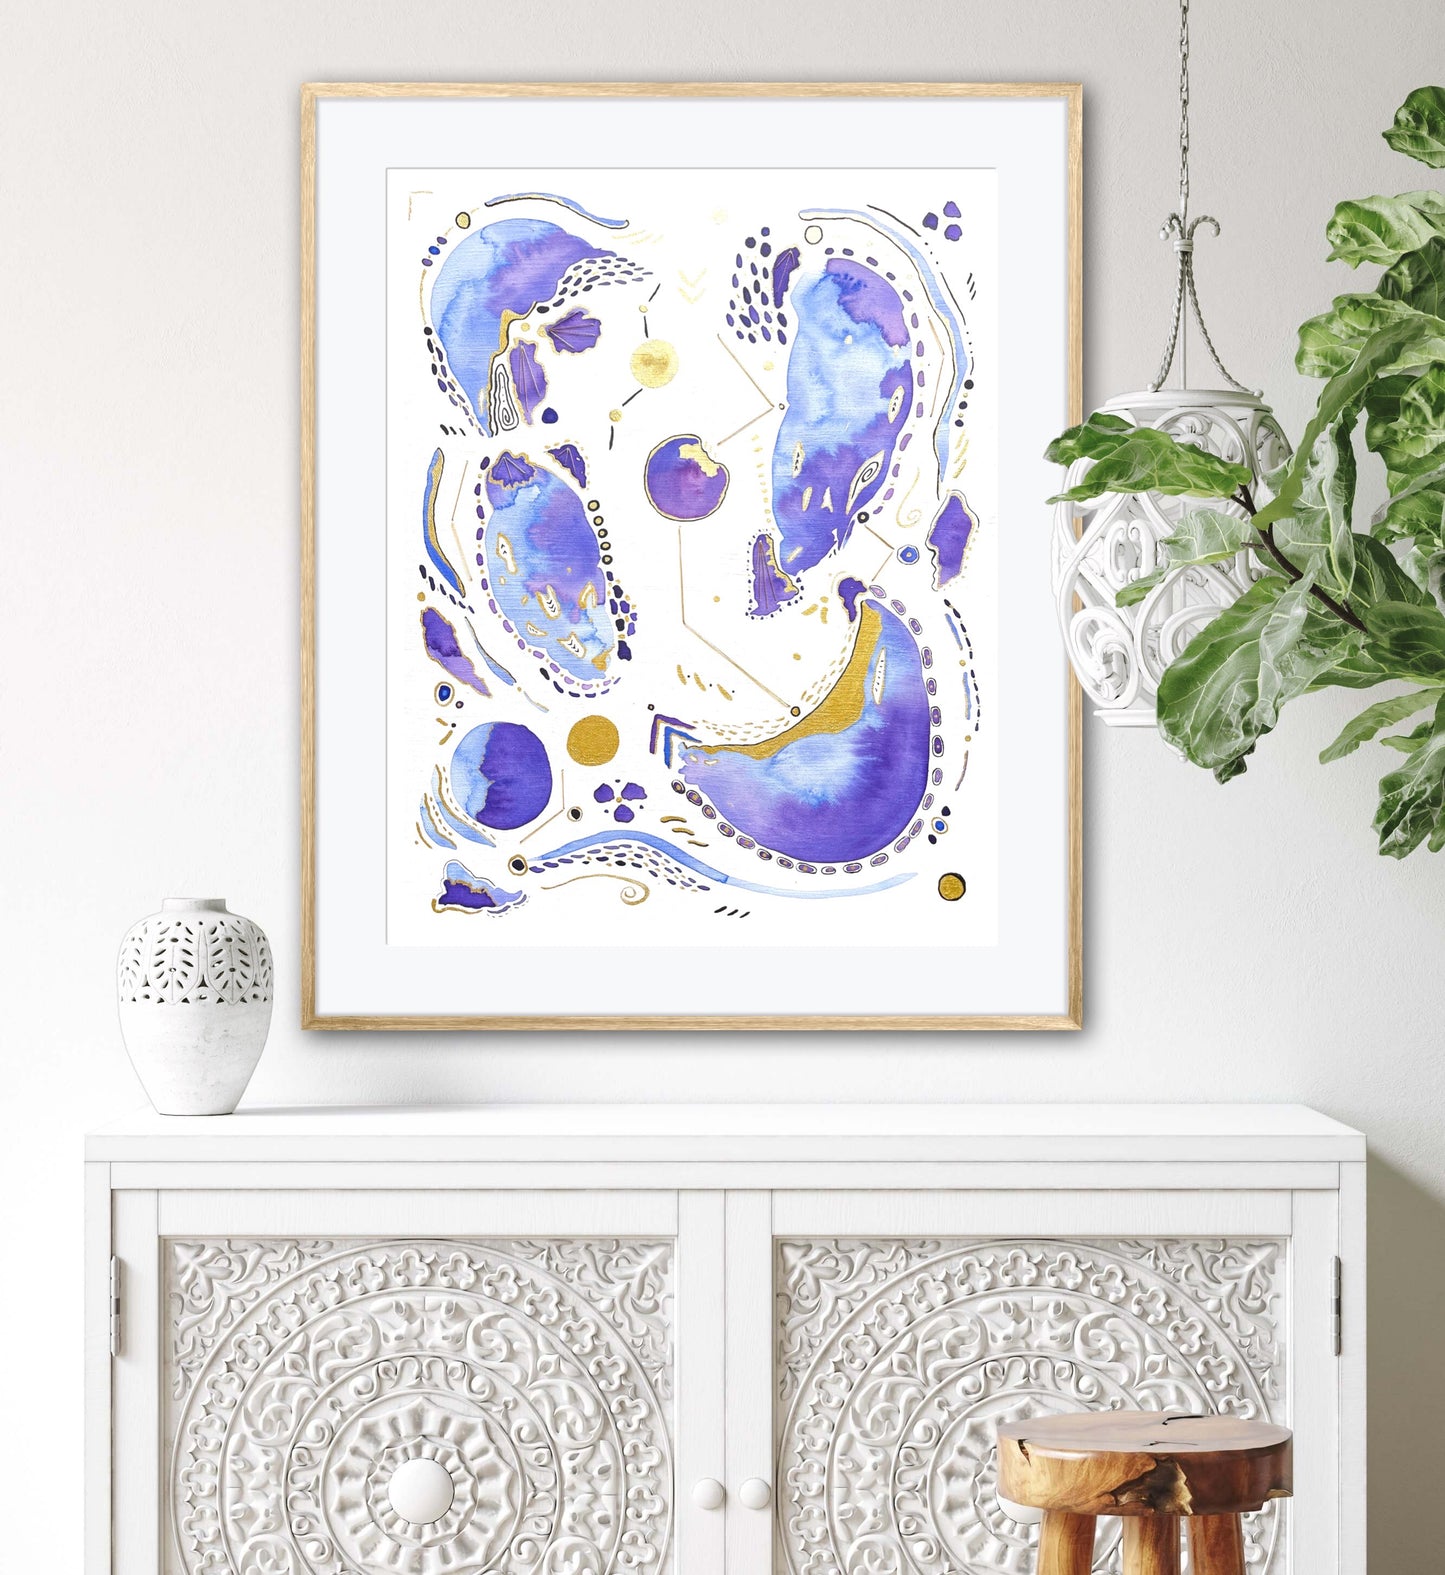 Cosmic Ocean Abstract Embellished Art Print - Signed By the Artist